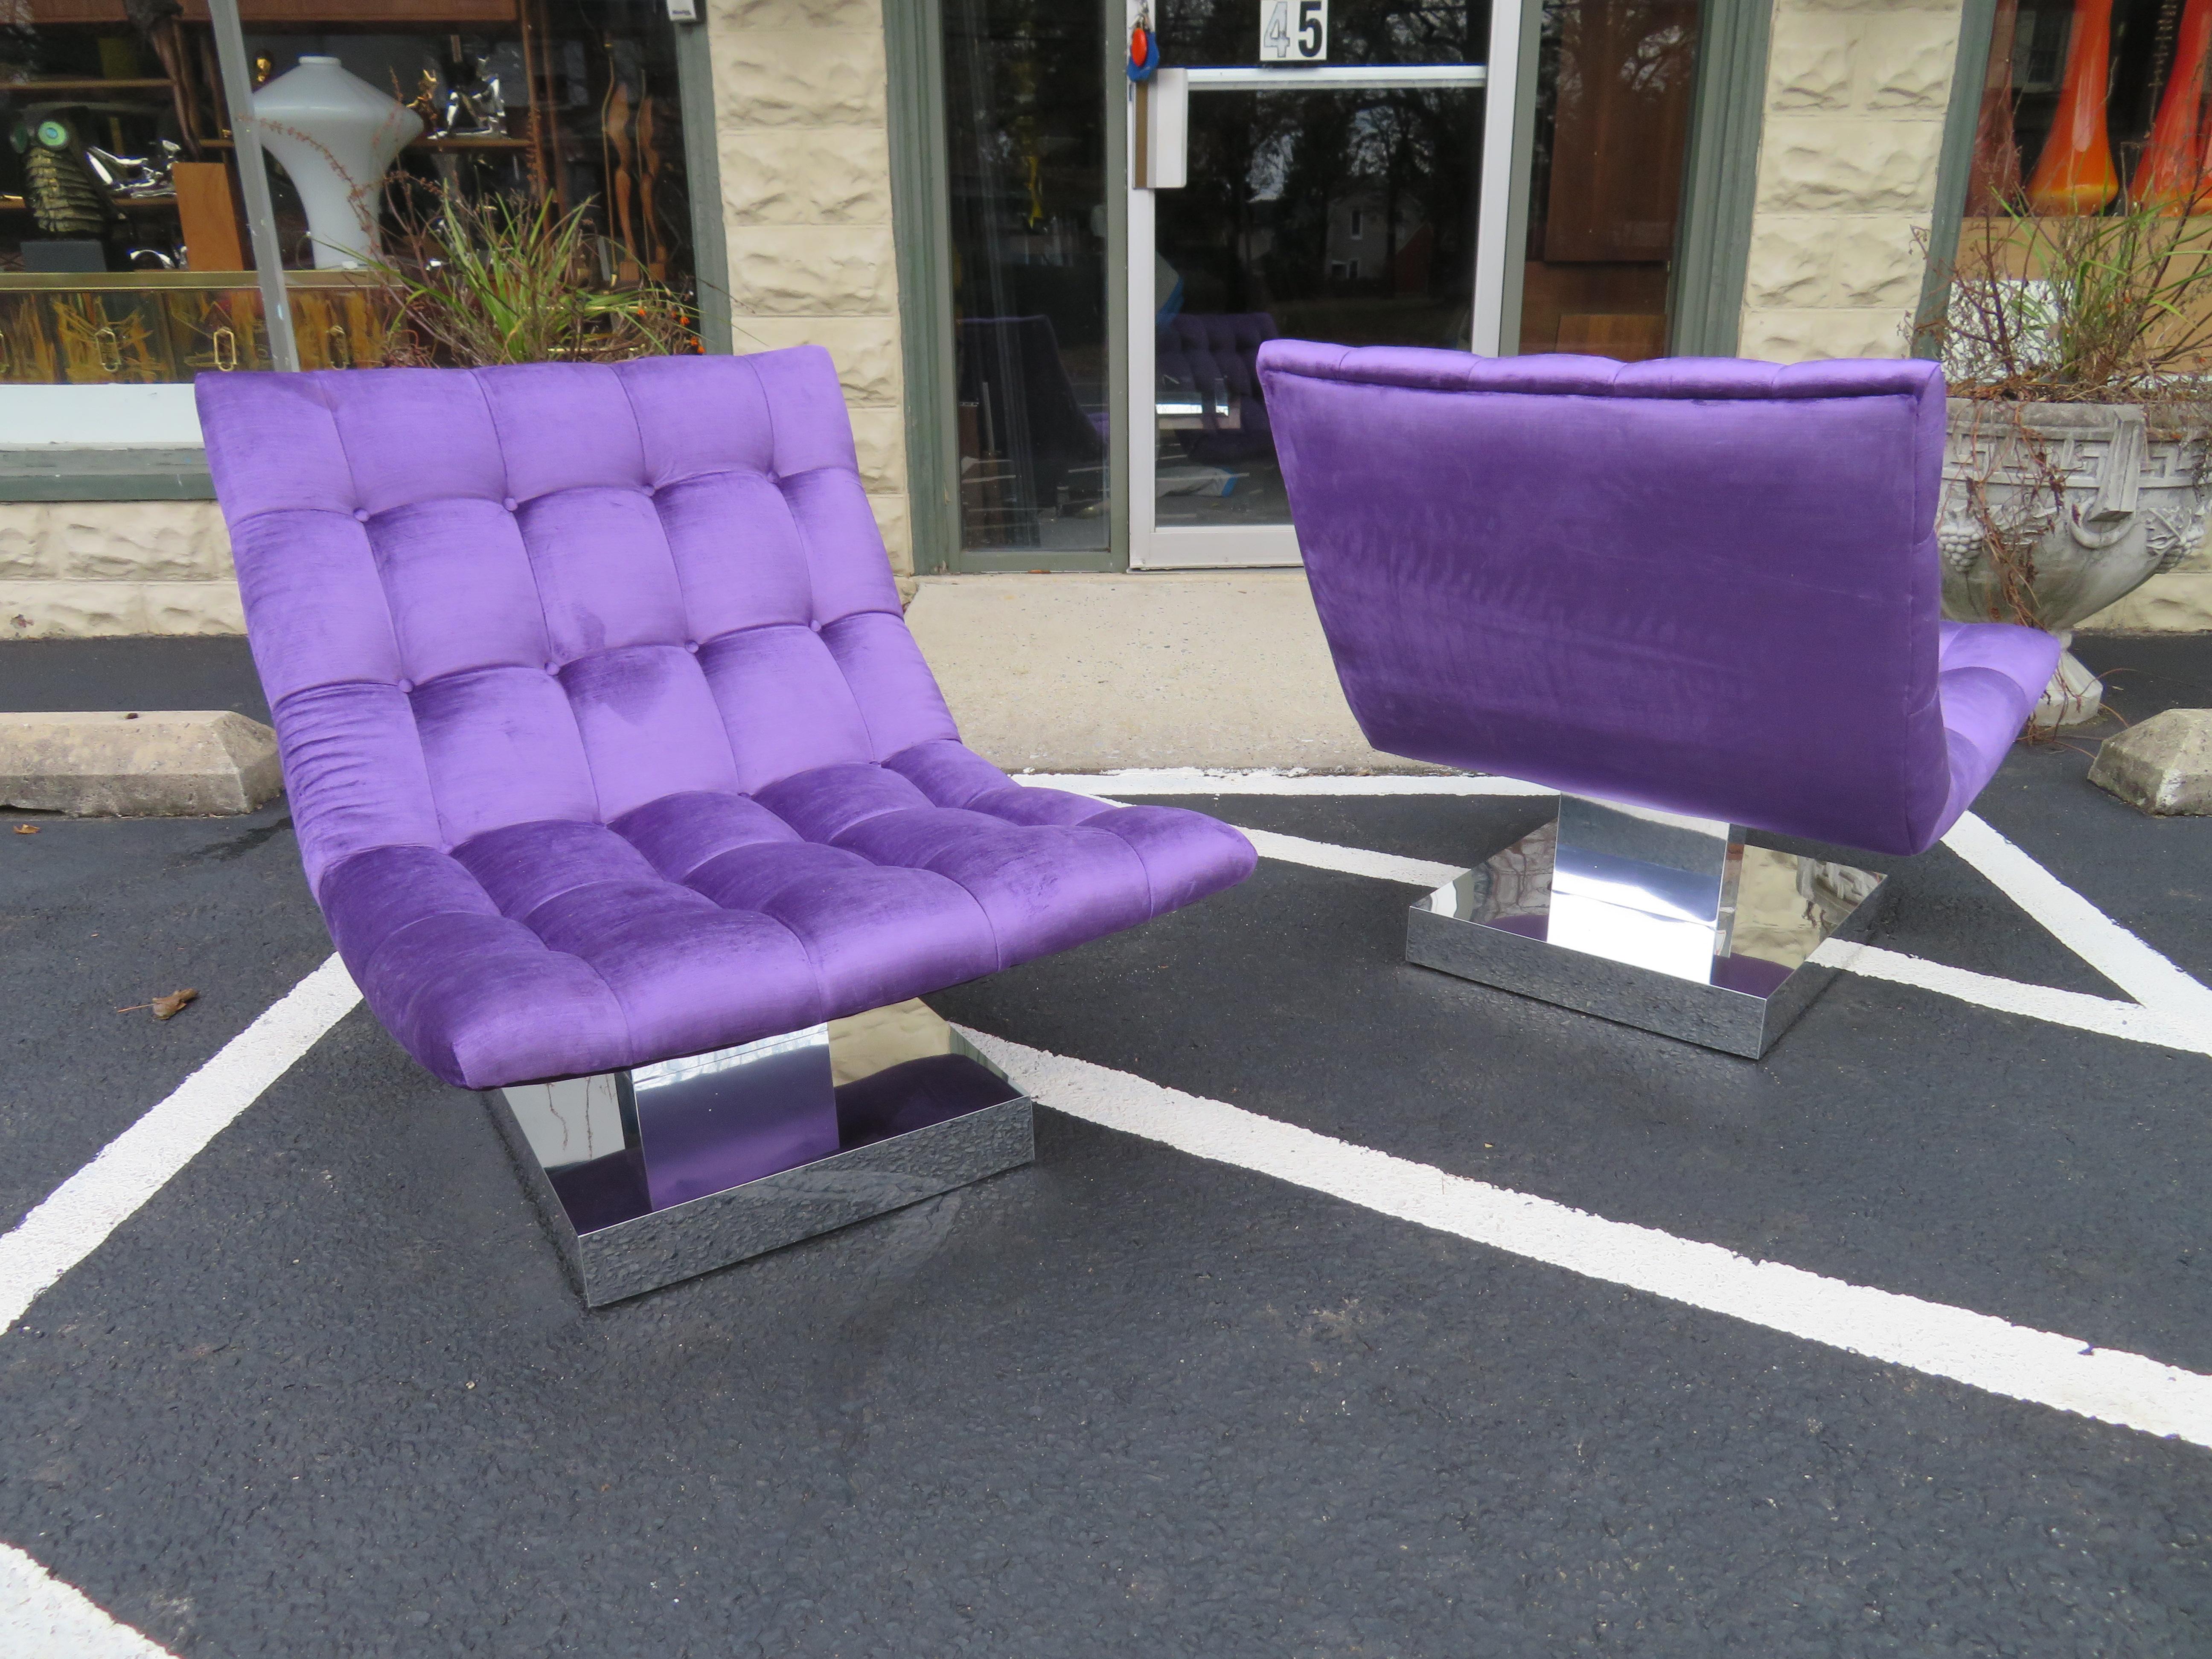 Magnificent pair of totally restored Milo Baughman tufted cube slipper chairs. These chairs have been re-upholstered with a high end lavender velvet and look scrumptious! The chrome bases have been re-chromed and also look amazing! There are no